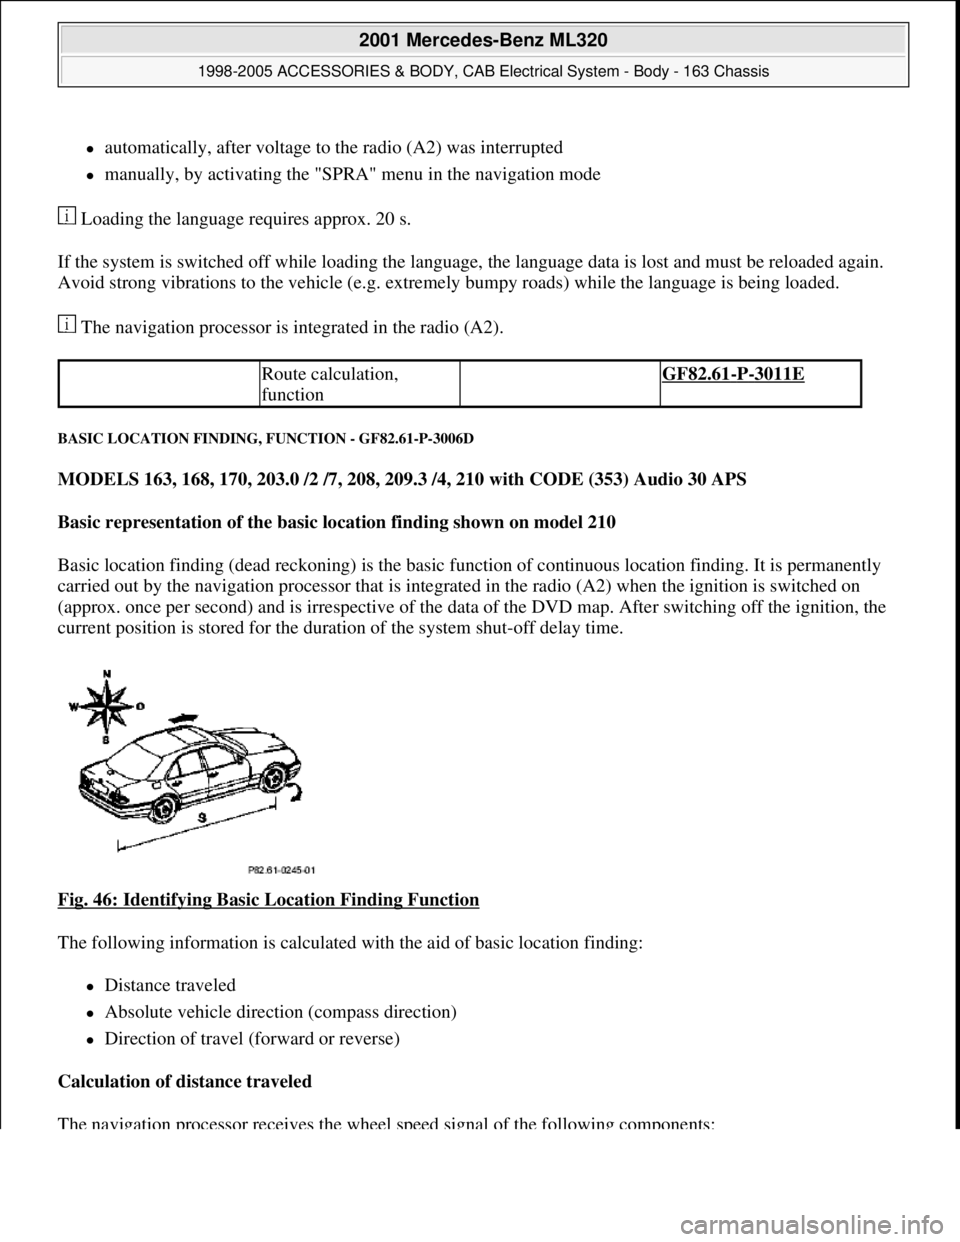 MERCEDES-BENZ ML350 1997  Complete Repair Manual automatically, after voltage to the radio (A2) was interrupted  
manually, by activating the "SPRA" menu in the navigation mode  
 Loading the language requires approx. 20 s. 
If the system is s